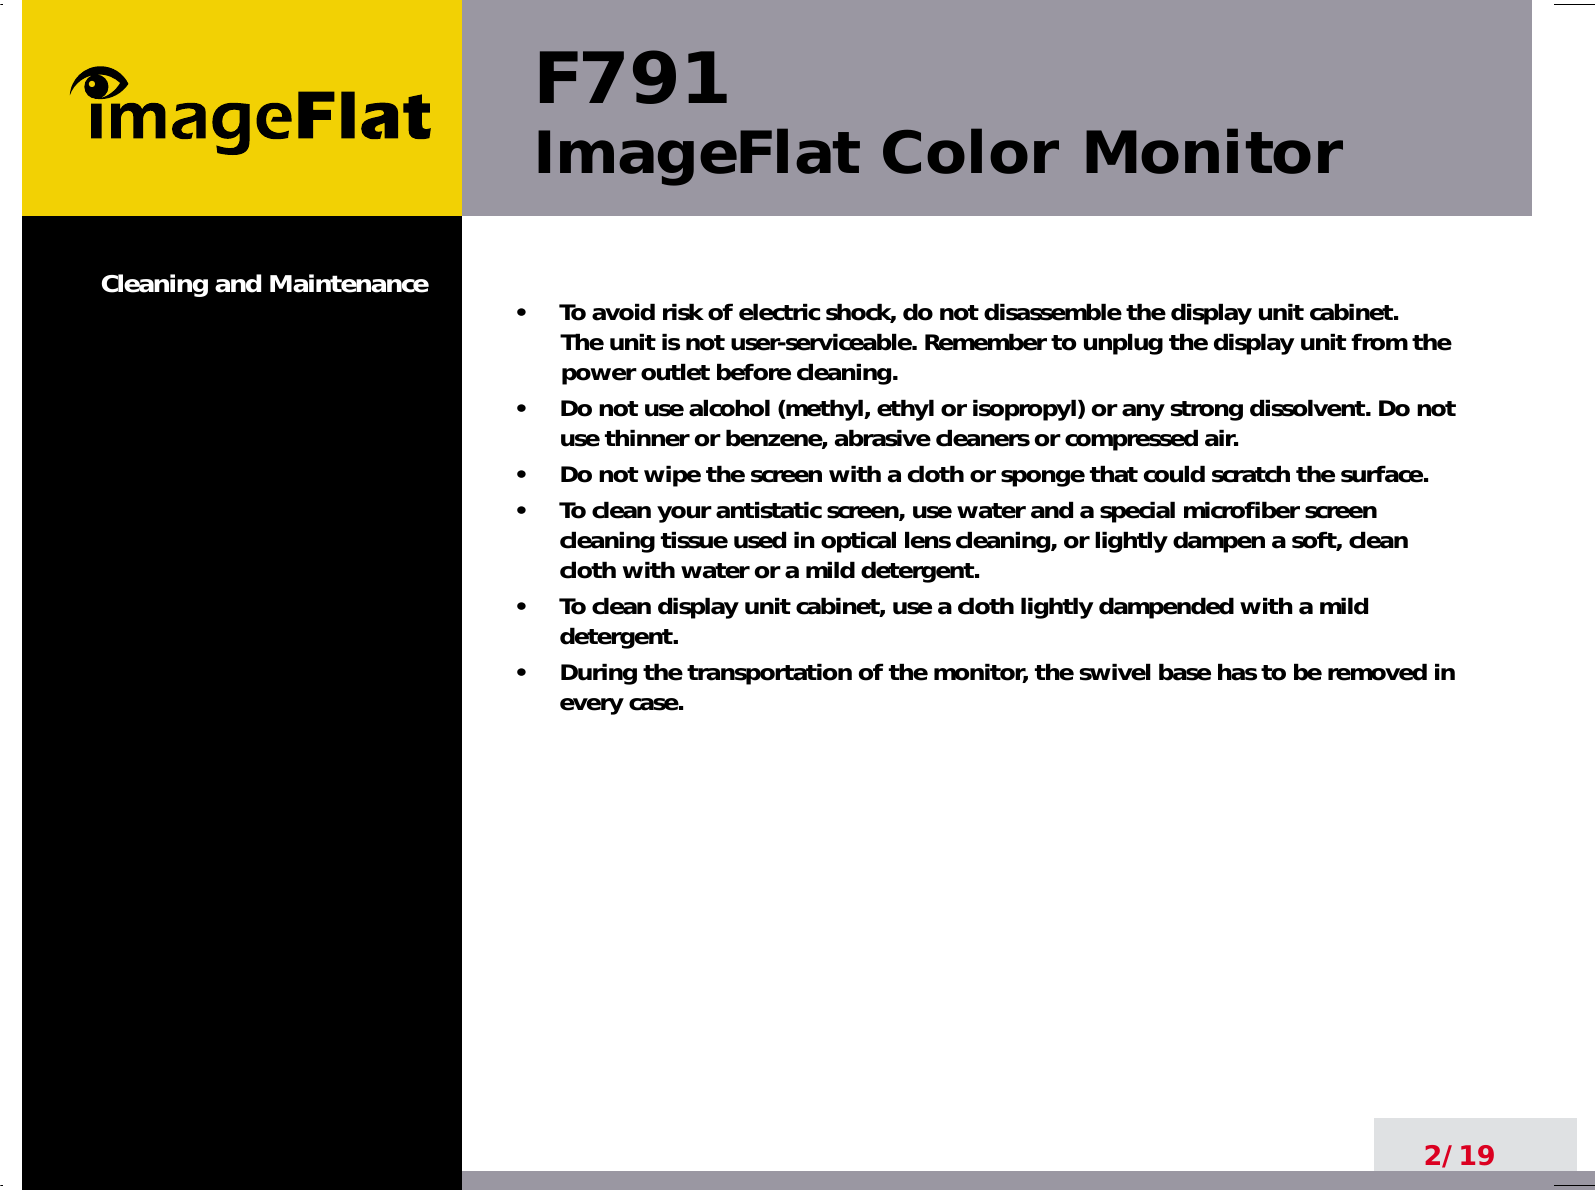 F791ImageFlat Color Monitor2/19•     To avoid risk of electric shock, do not disassemble the display unit cabinet. The unit is not user-serviceable. Remember to unplug the display unit from thepower outlet before cleaning.•     Do not use alcohol (methyl, ethyl or isopropyl) or any strong dissolvent. Do notuse thinner or benzene, abrasive cleaners or compressed air.•     Do not wipe the screen with a cloth or sponge that could scratch the surface.•     To clean your antistatic screen, use water and a special microfiber screencleaning tissue used in optical lens cleaning, or lightly dampen a soft, cleancloth with water or a mild detergent.•     To clean display unit cabinet, use a cloth lightly dampended with a milddetergent.•     During the transportation of the monitor, the swivel base has to be removed inevery case.Cleaning and Maintenance